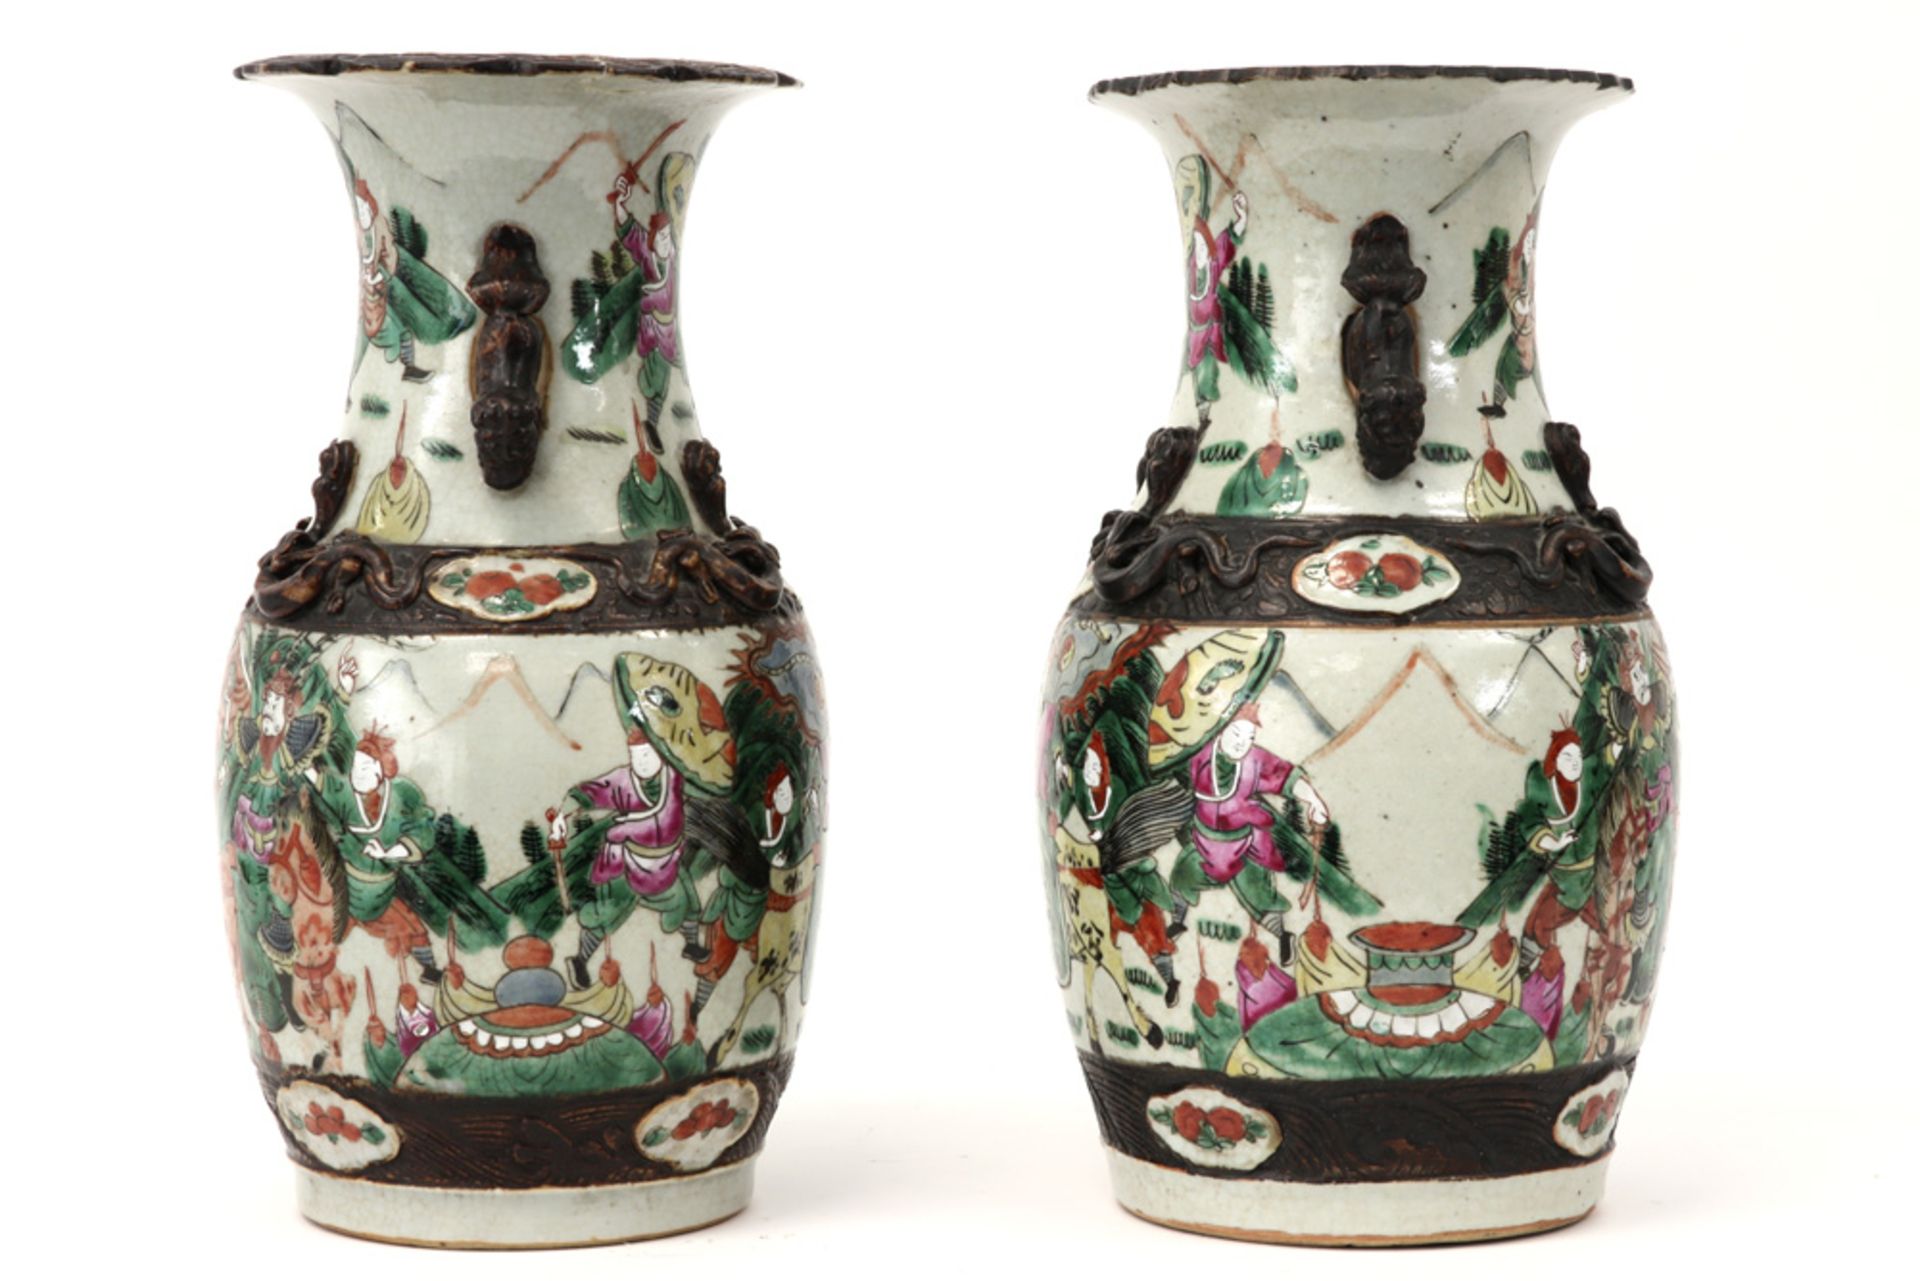 pair of antique Chinese "Nankin" vases in marked porcelain with a typical polychrome warriors' decor - Image 2 of 5